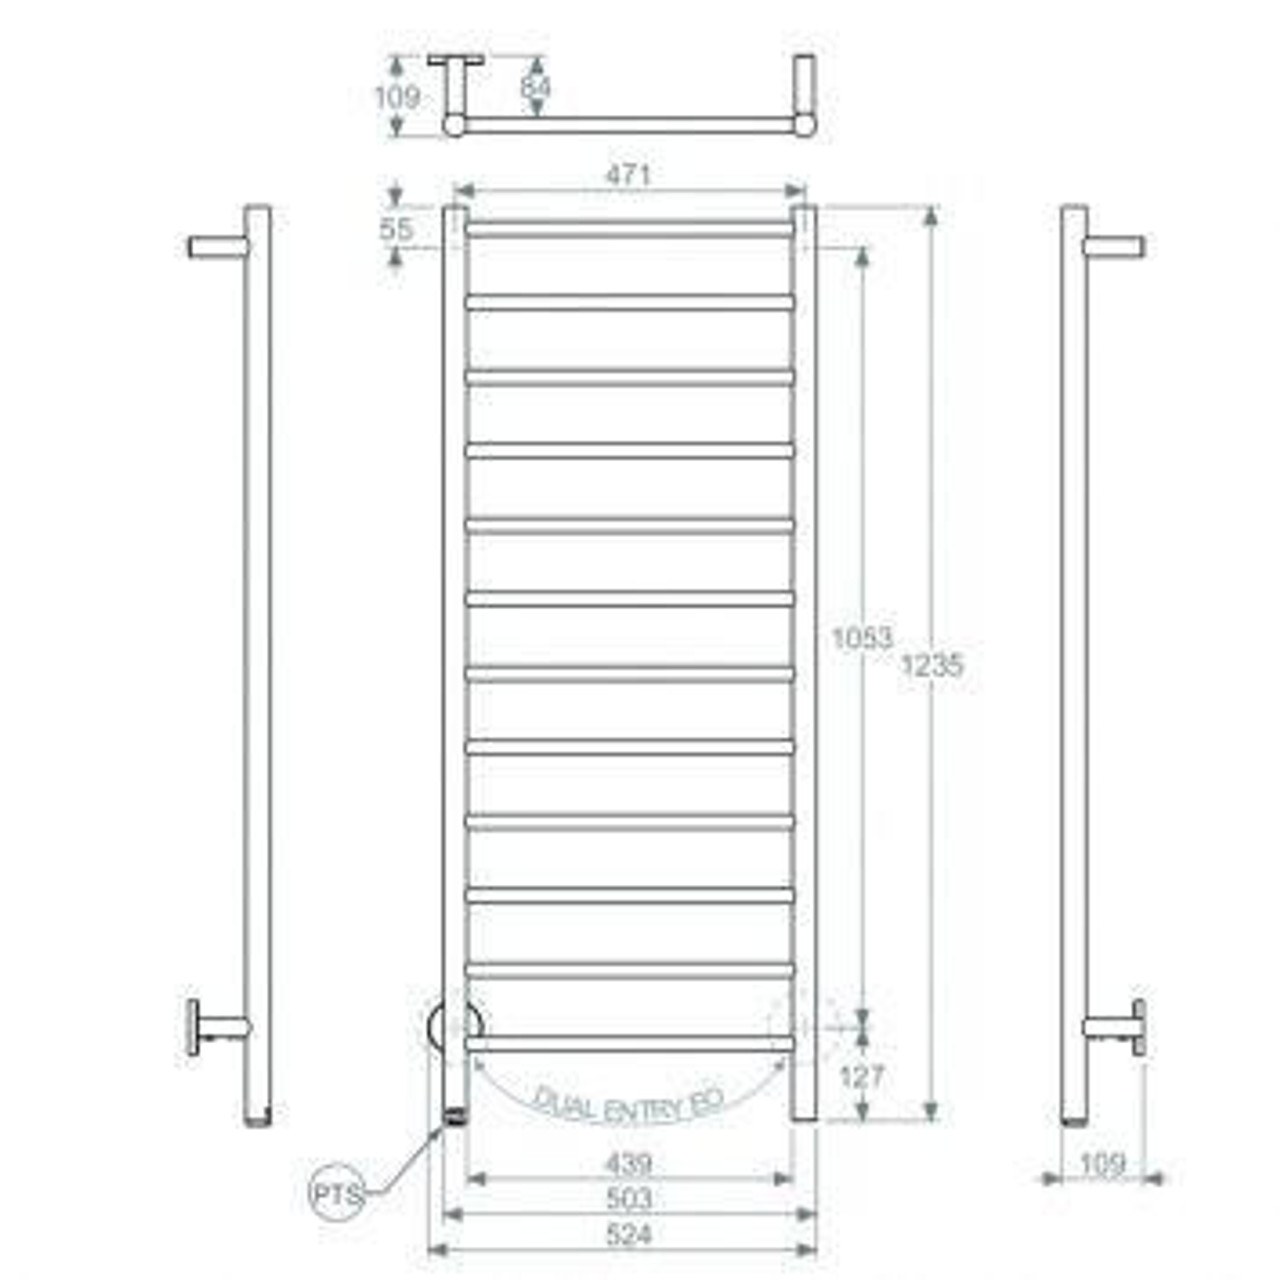 357035 Bathroom Butler Natural 12 Bar 500mm Straight Heated Towel Rail with PTSelect Switch Polished Stainless Steel NAT12221-PTS-POLS